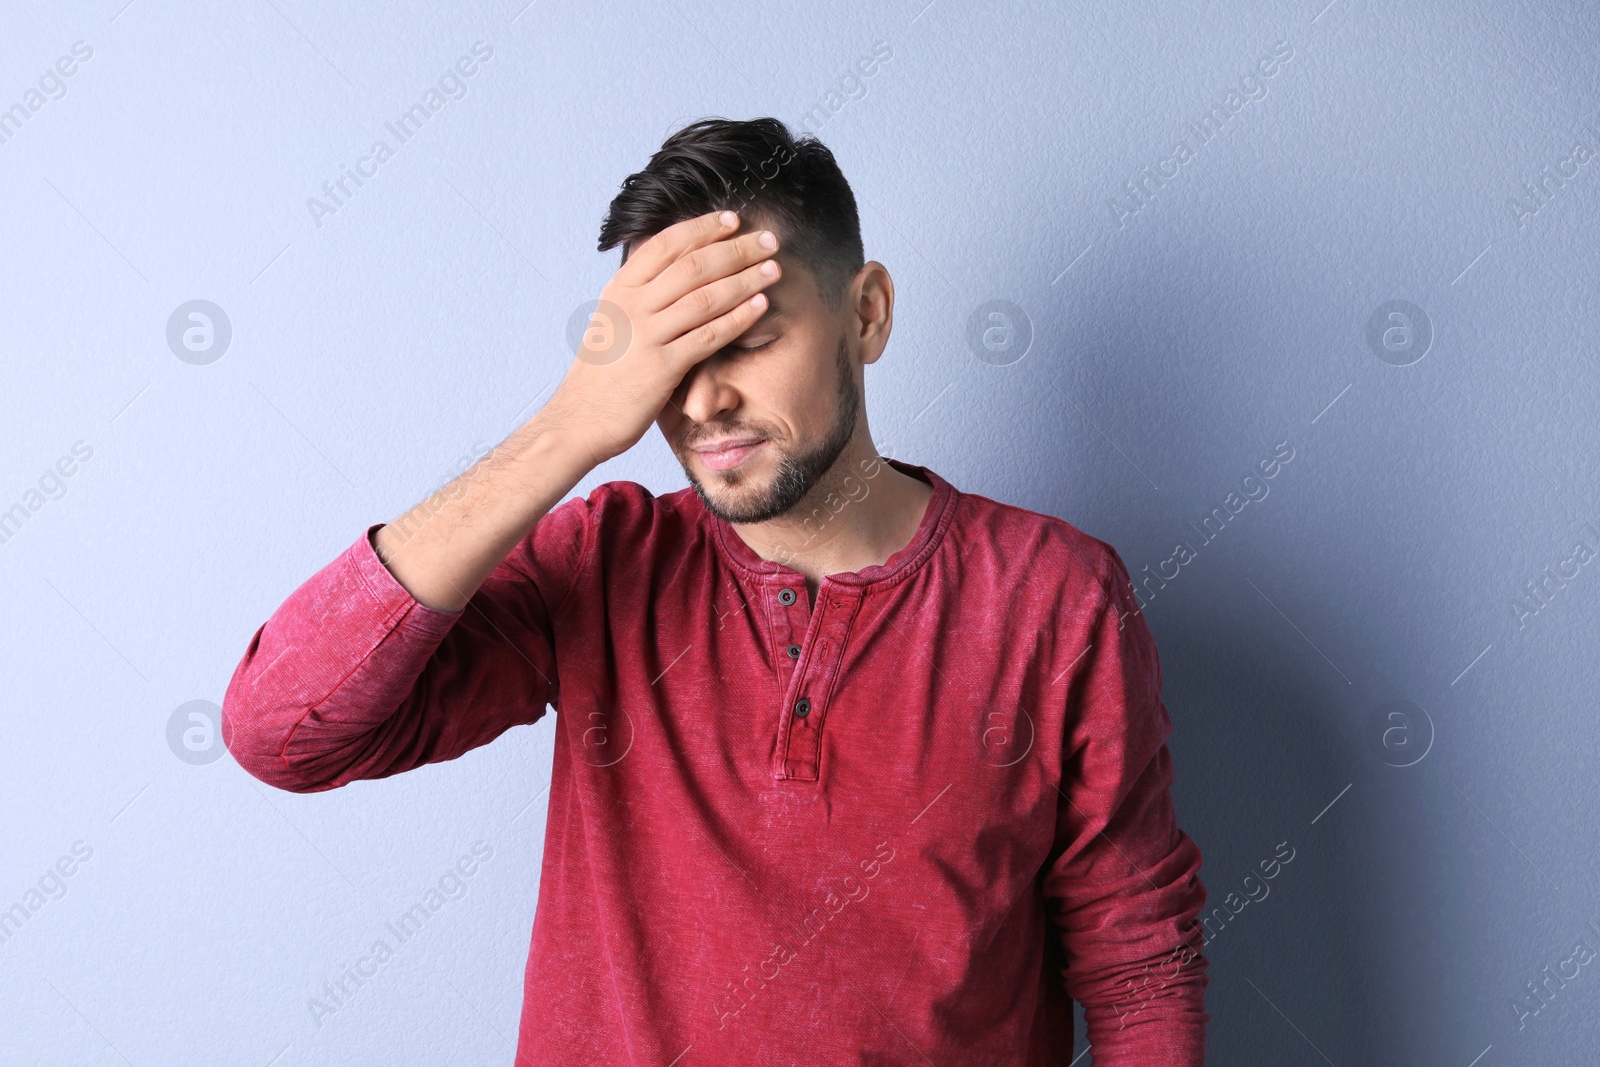 Photo of Man suffering from headache on color background